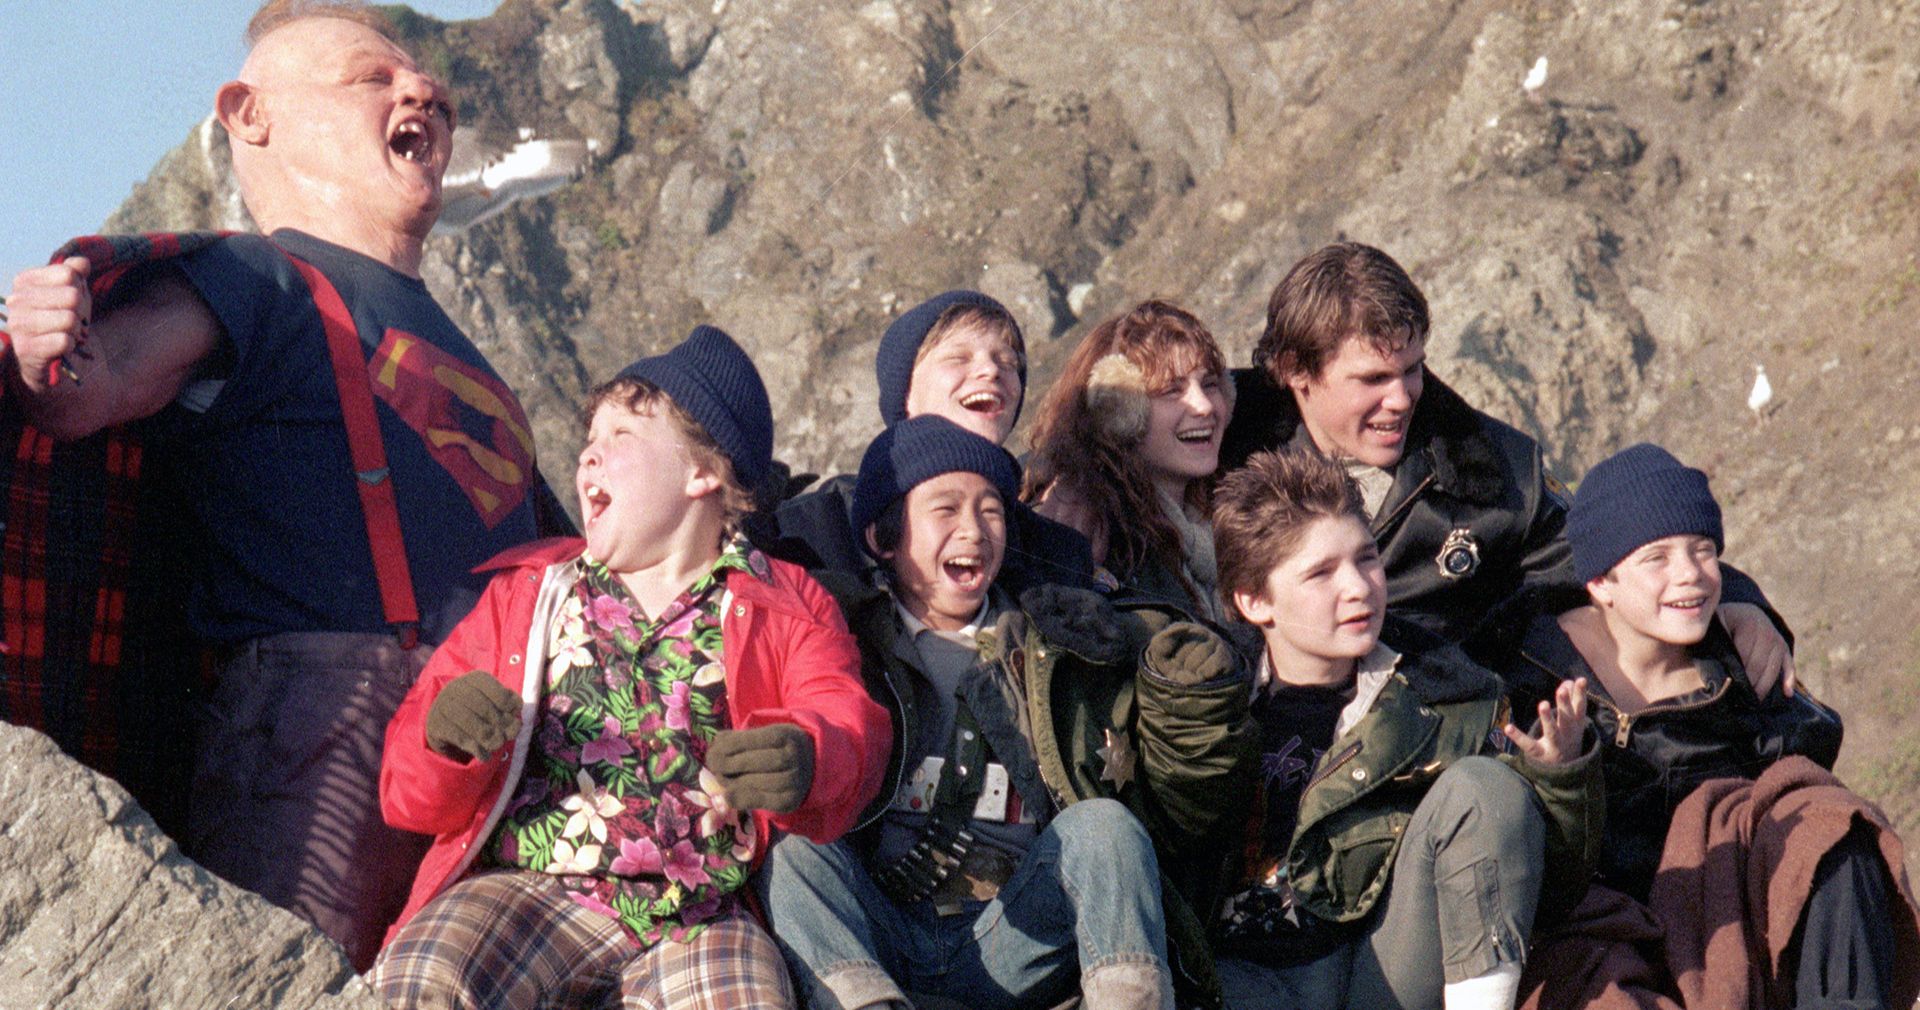 The Goonies Cast Will Reunite This December for a Good Cause